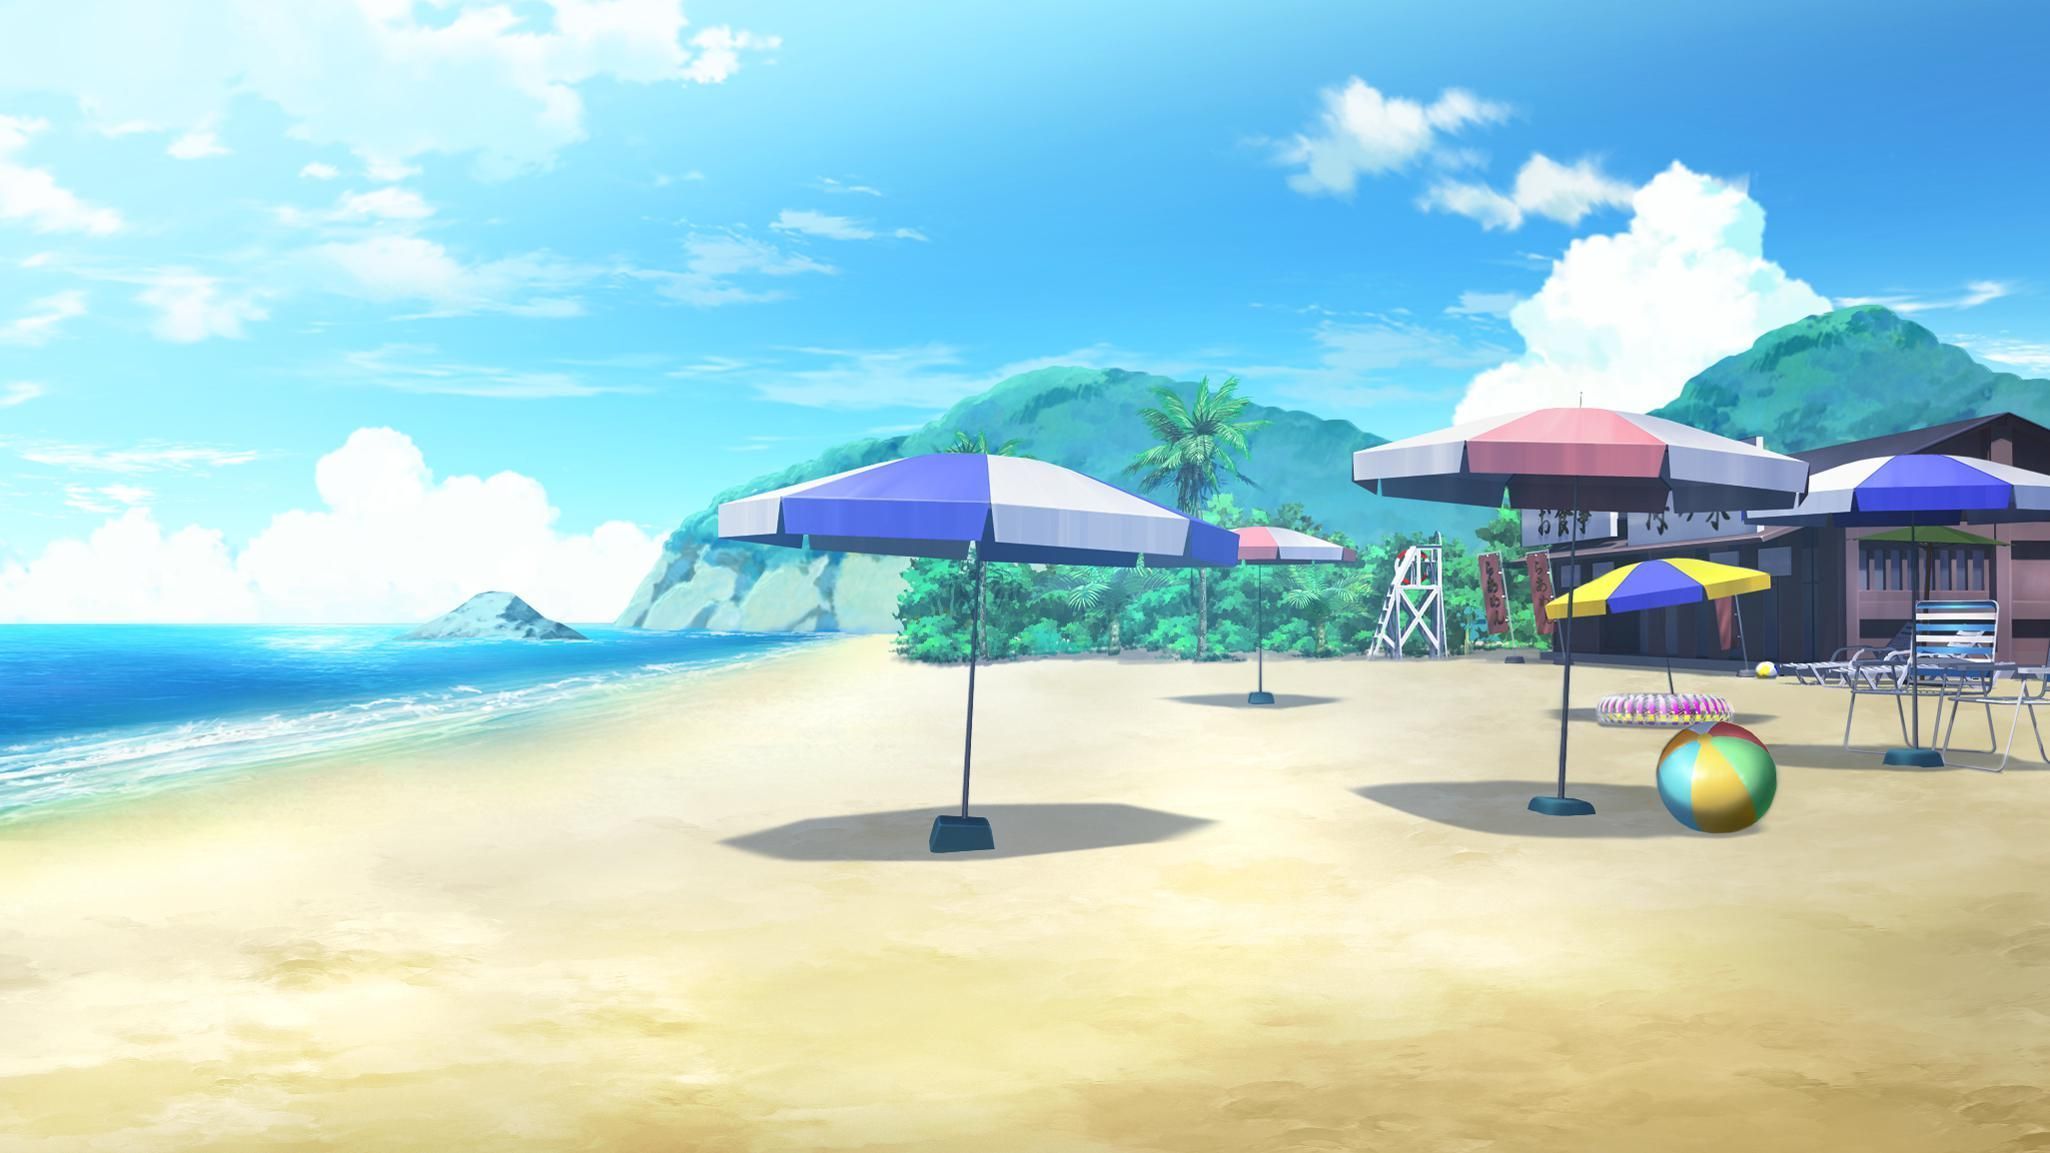 HD Wall Papers Image Wallpaper Anime Beach